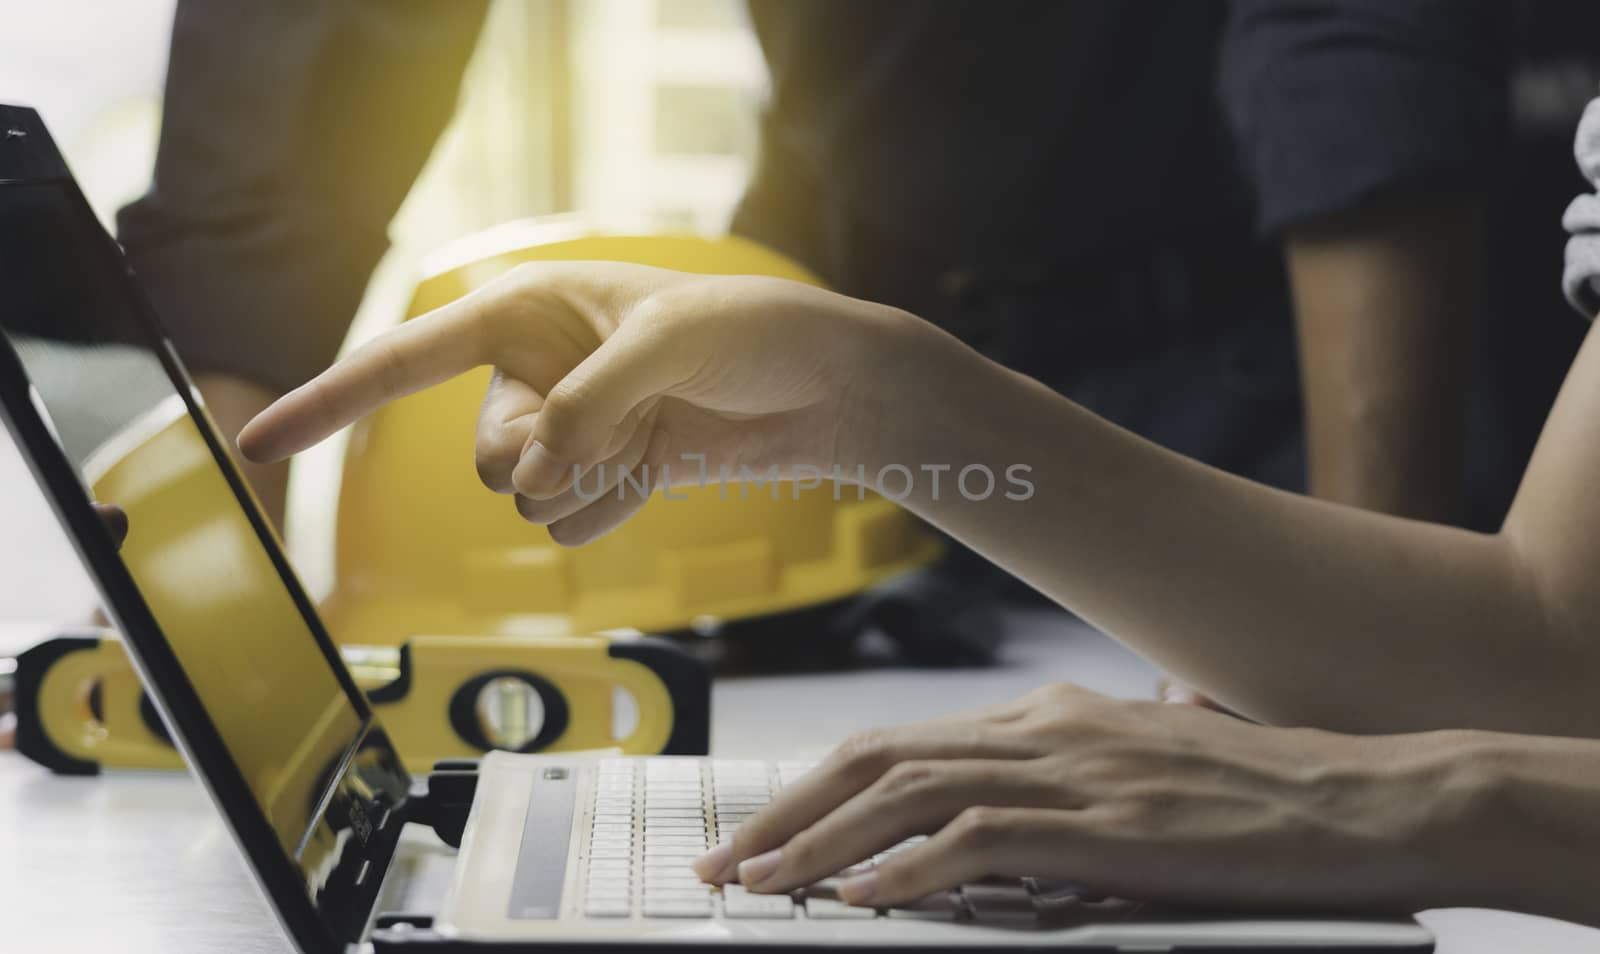 Architect engineer working concept and construction tools or safety equipment on table.